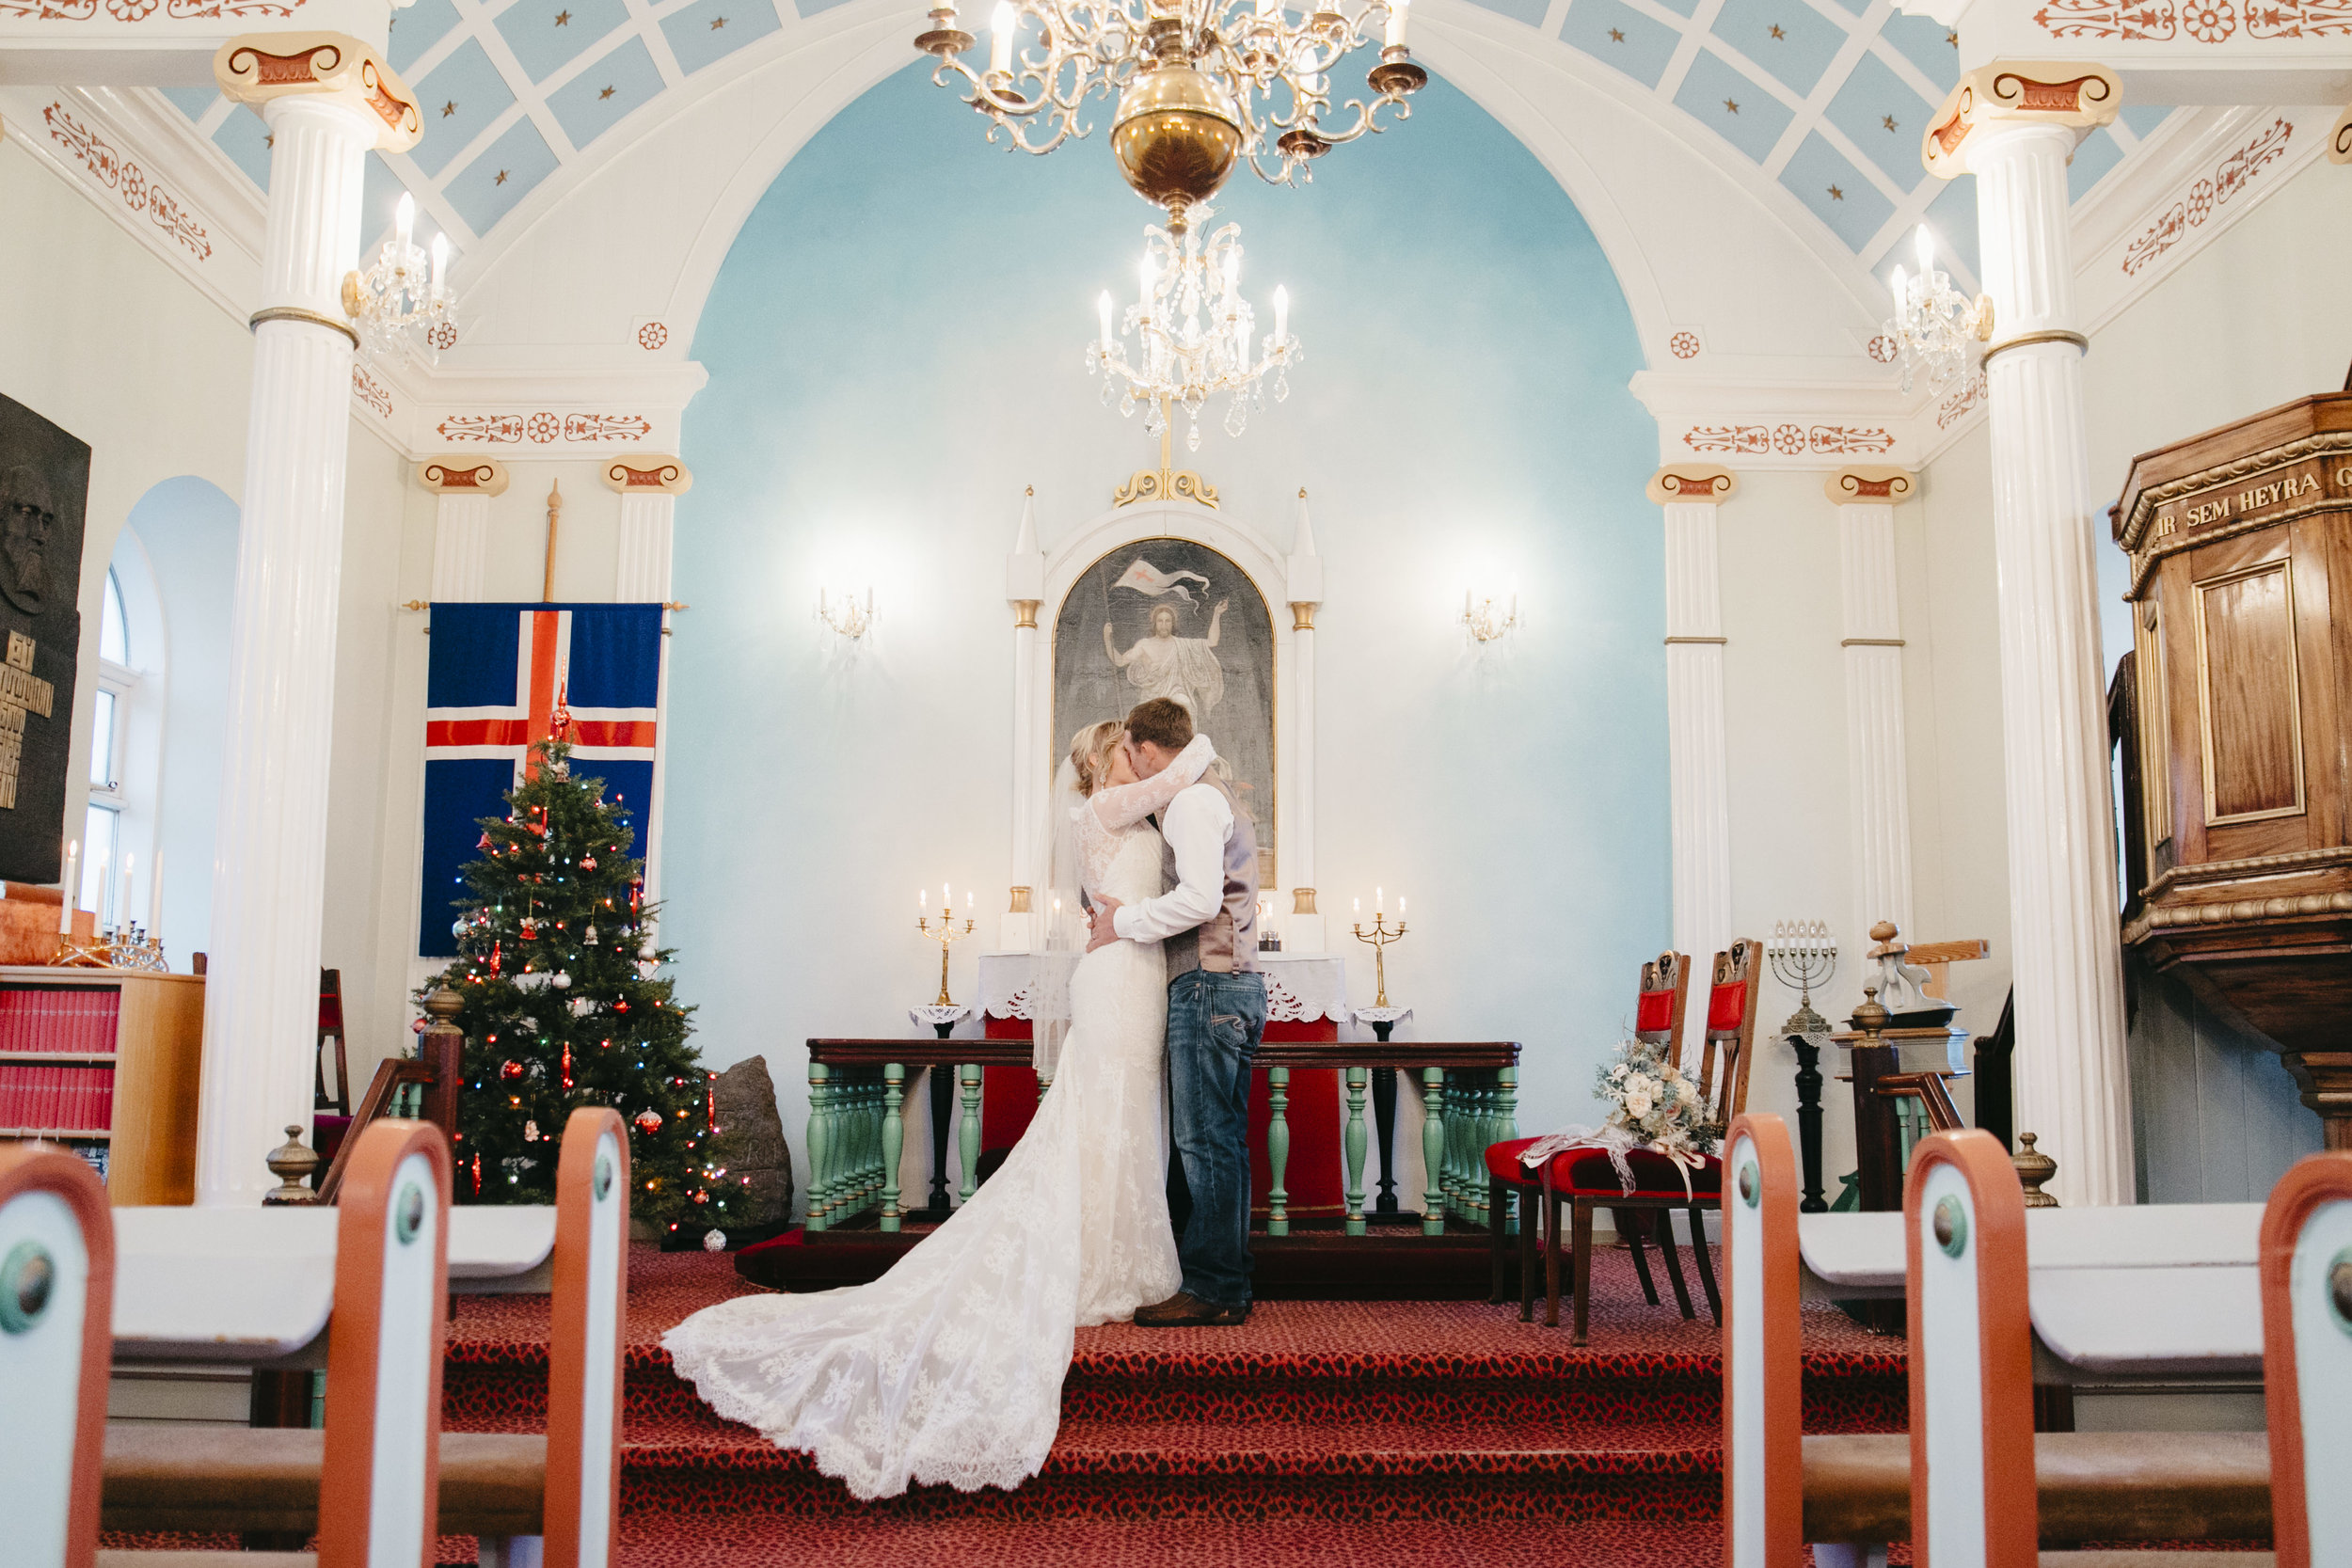 The bride and groom seal their vows with a kiss in Hvalsneskirkja Church while eloping in Iceland with their photographers Colby and Jess.